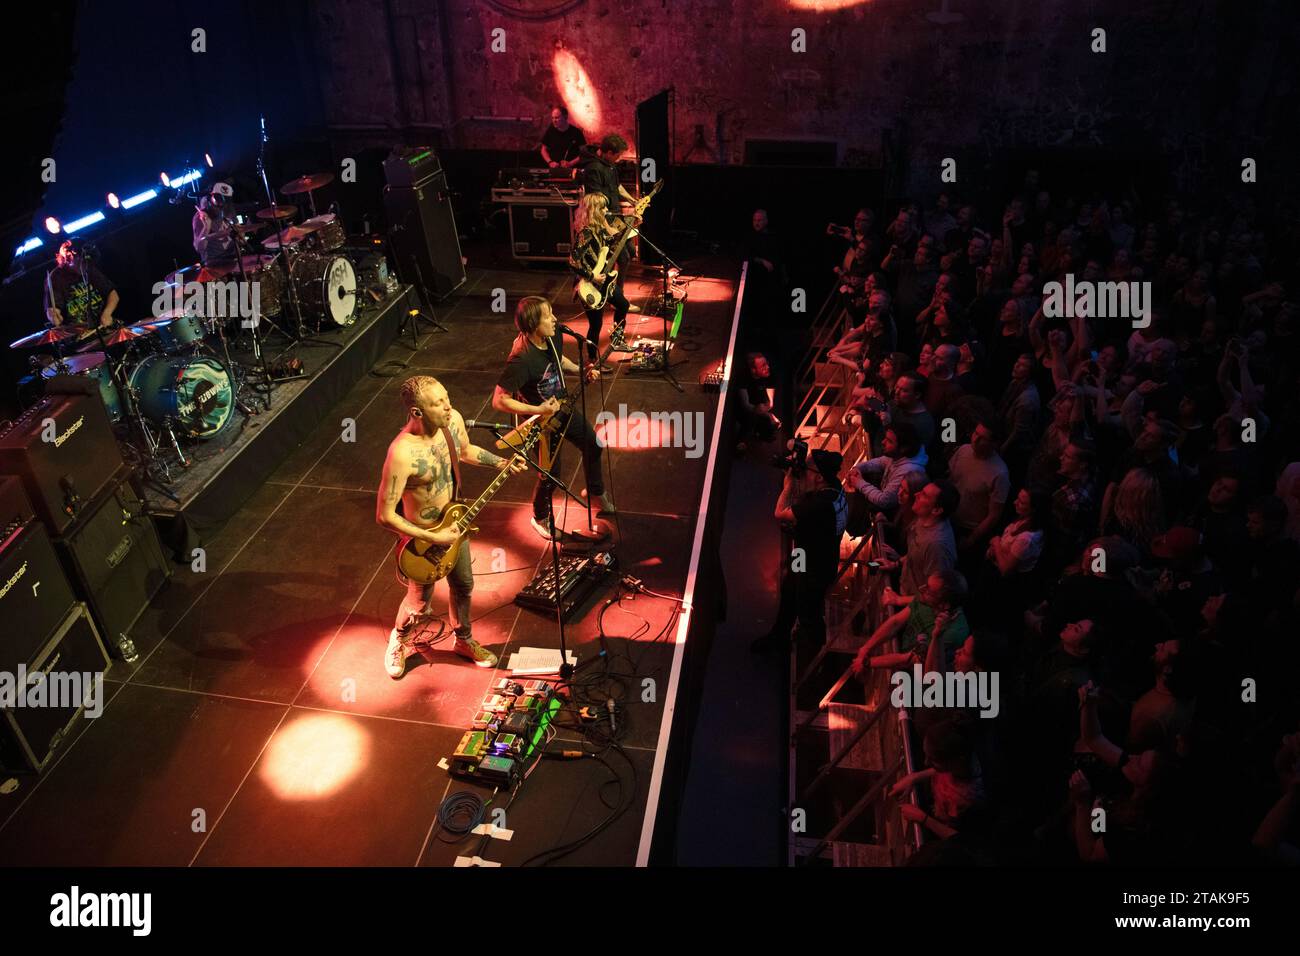 British alternative rock band, The Subways, performing live at the Kesselhaus in der Kulturbrauerei in a co-headlined tour with Ash. Stock Photo